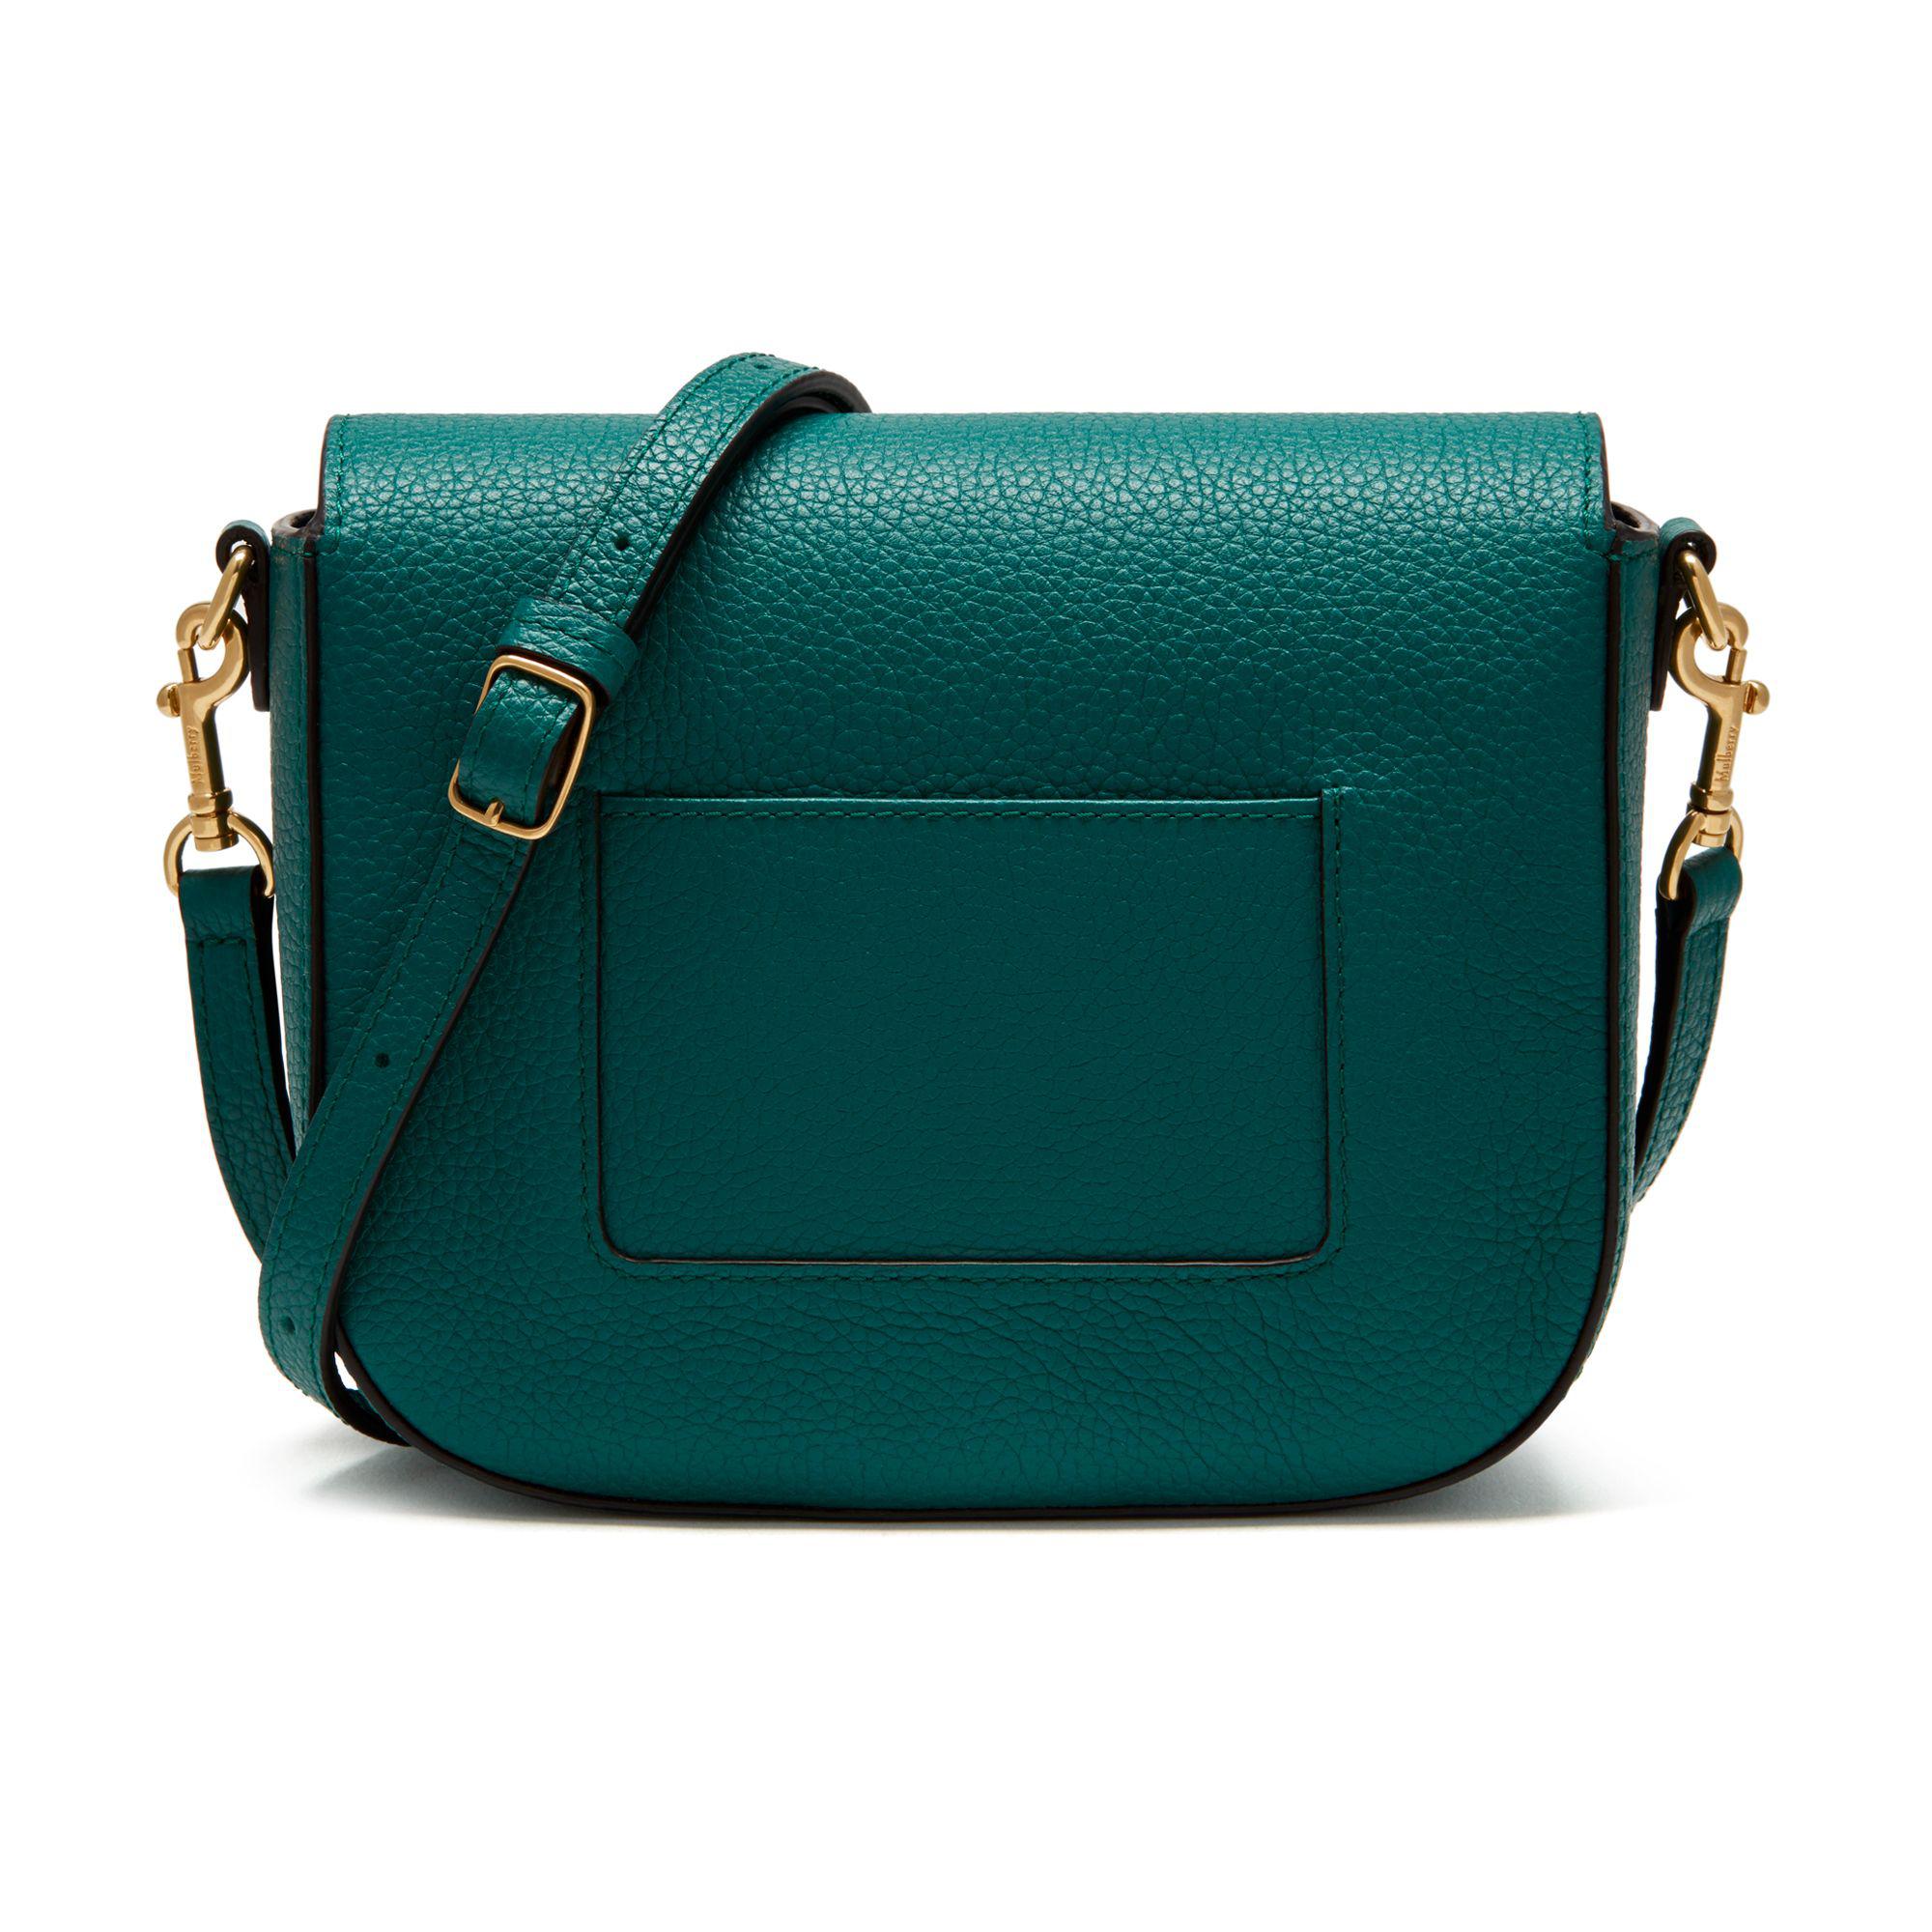 Mulberry Small Darley Satchel in Green - Lyst